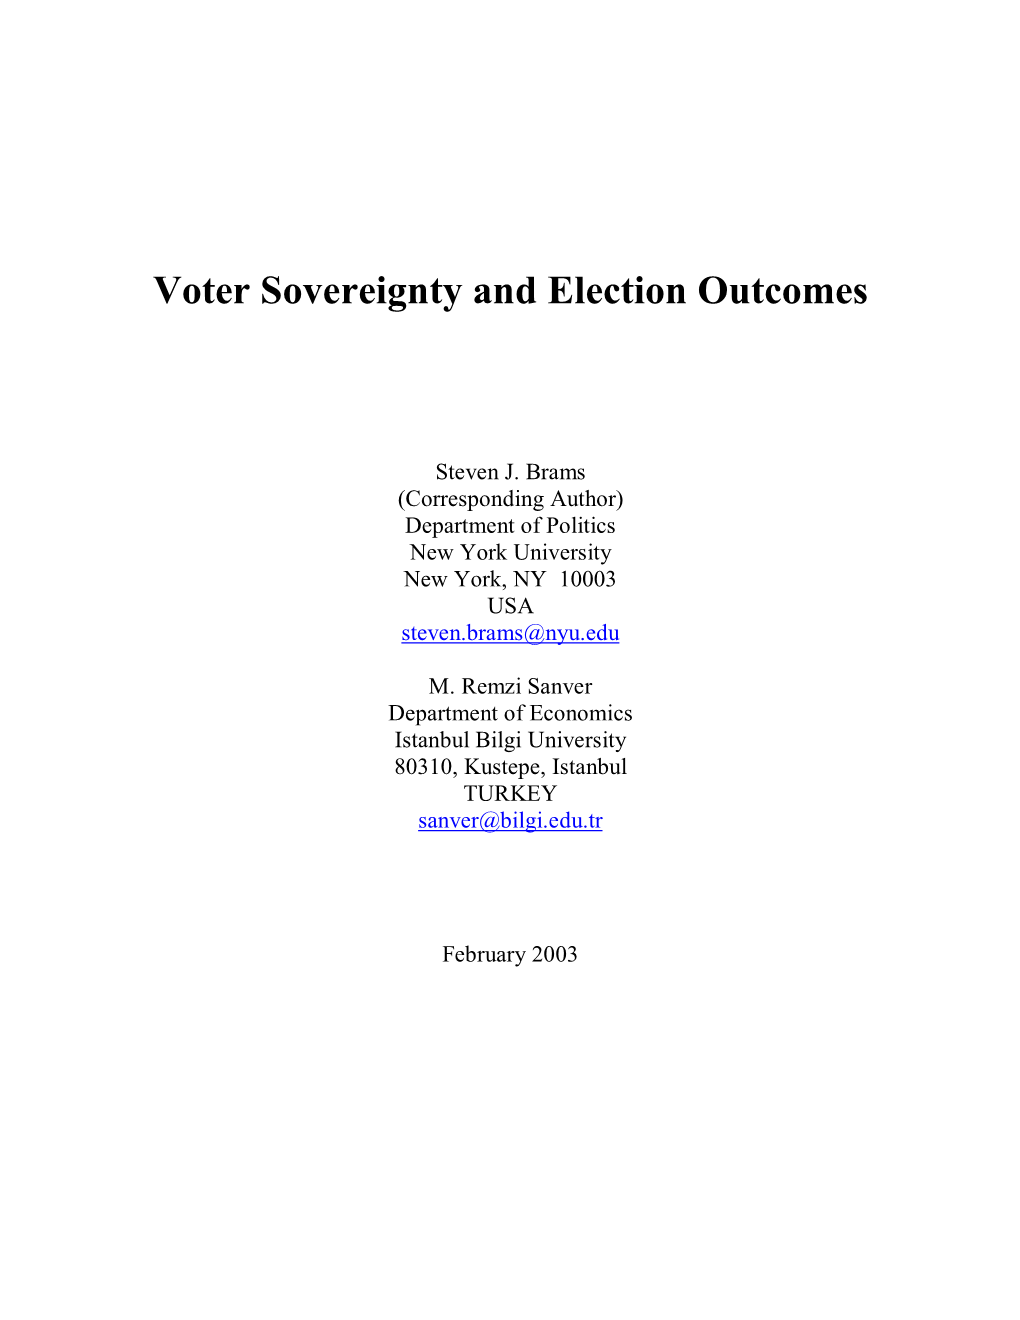 Voter Sovereignty and Election Outcomes